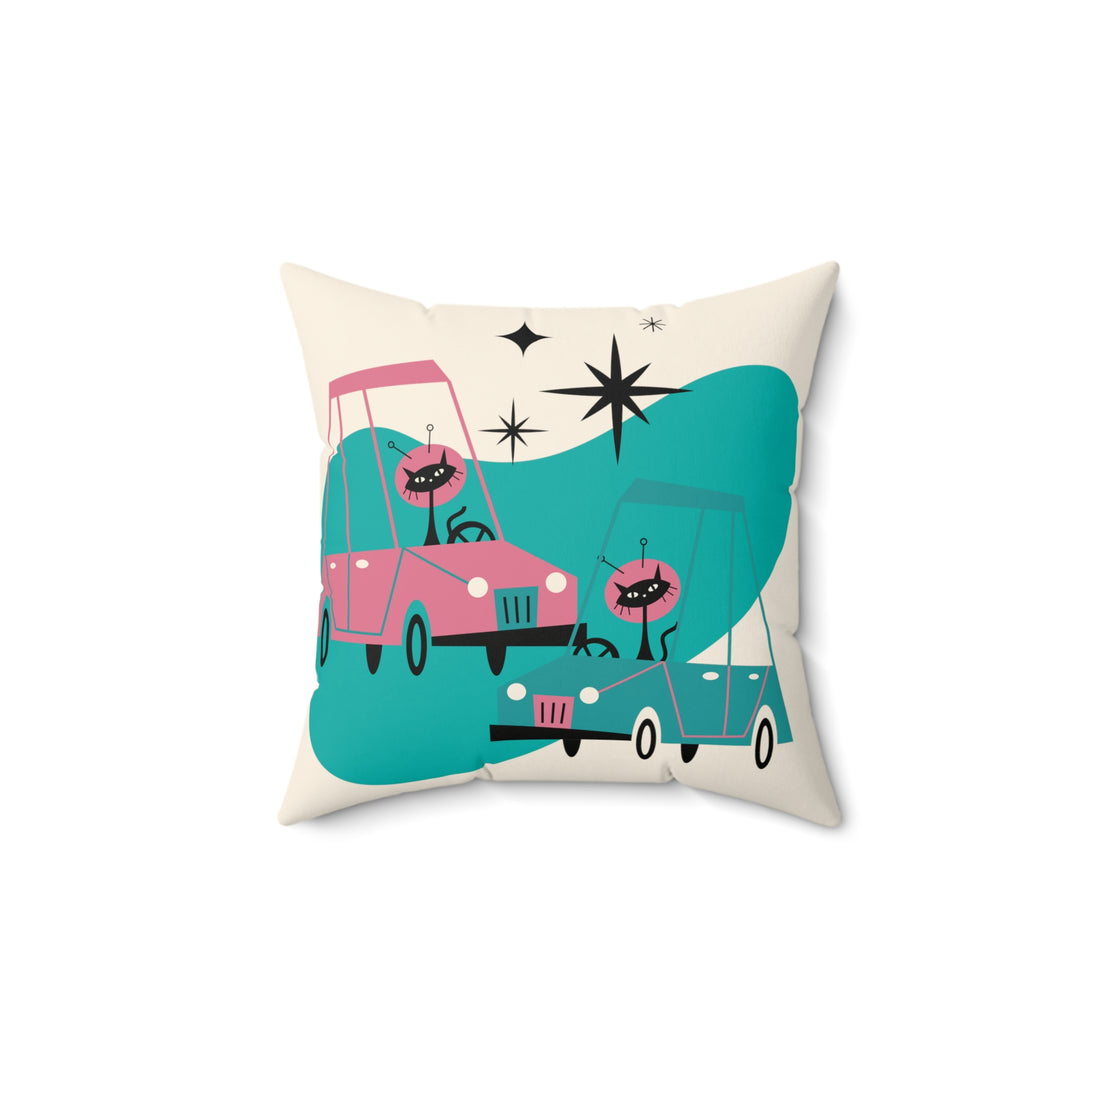 Atomic Space Cats, Beep Beep, Retro Cars, Space Kitties, Kitschy Fun Quirky Throw Pillow With Insert